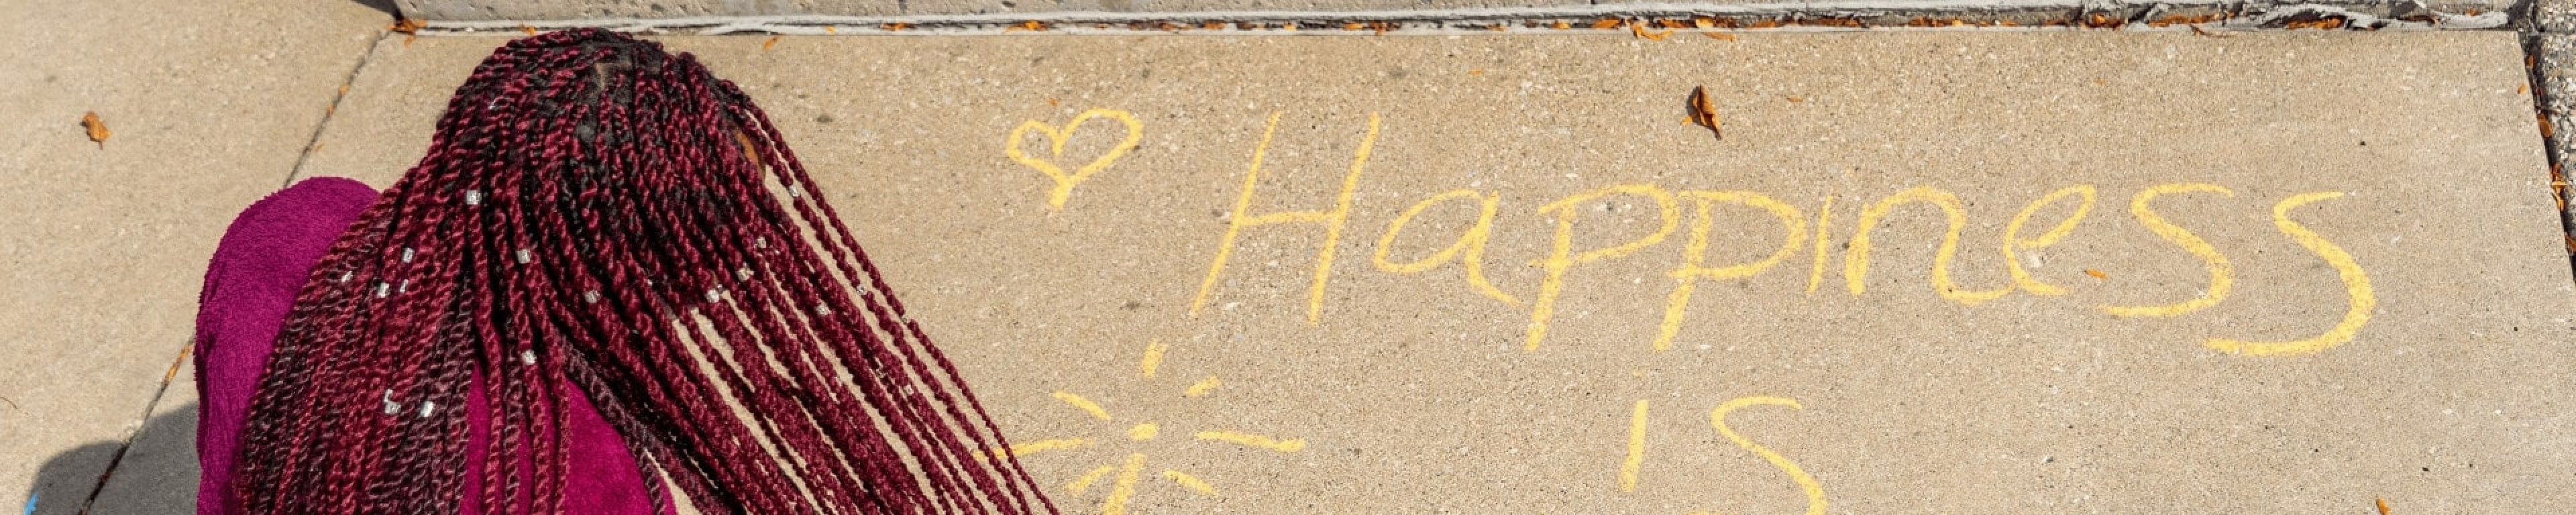 a student writes a "happiness" message in chalk on campus